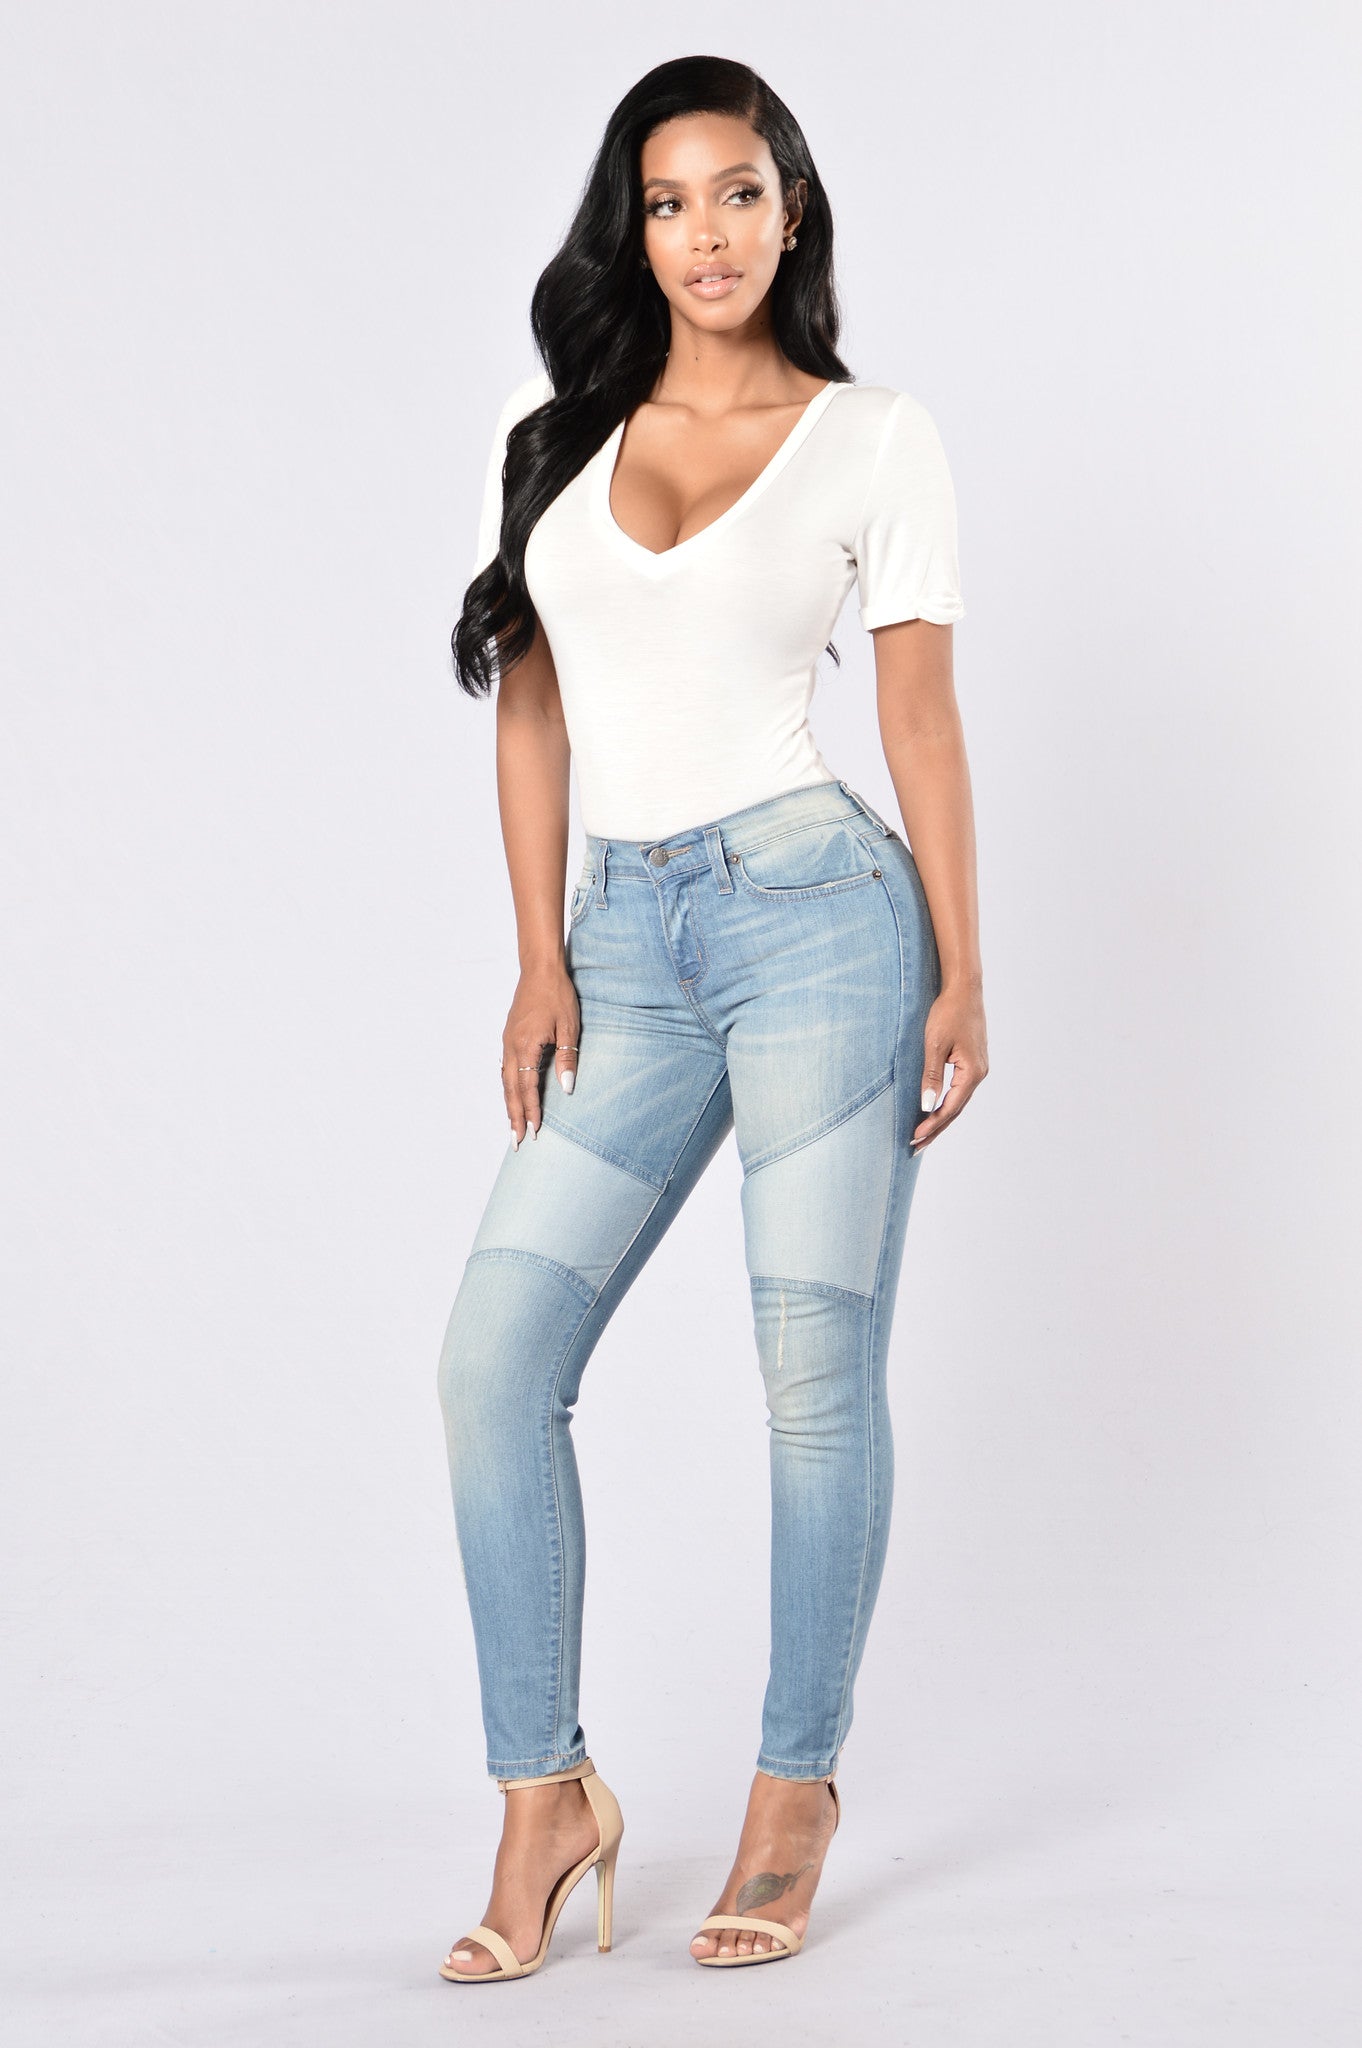 Let's Patch Things Up Jeans - Medium Blue